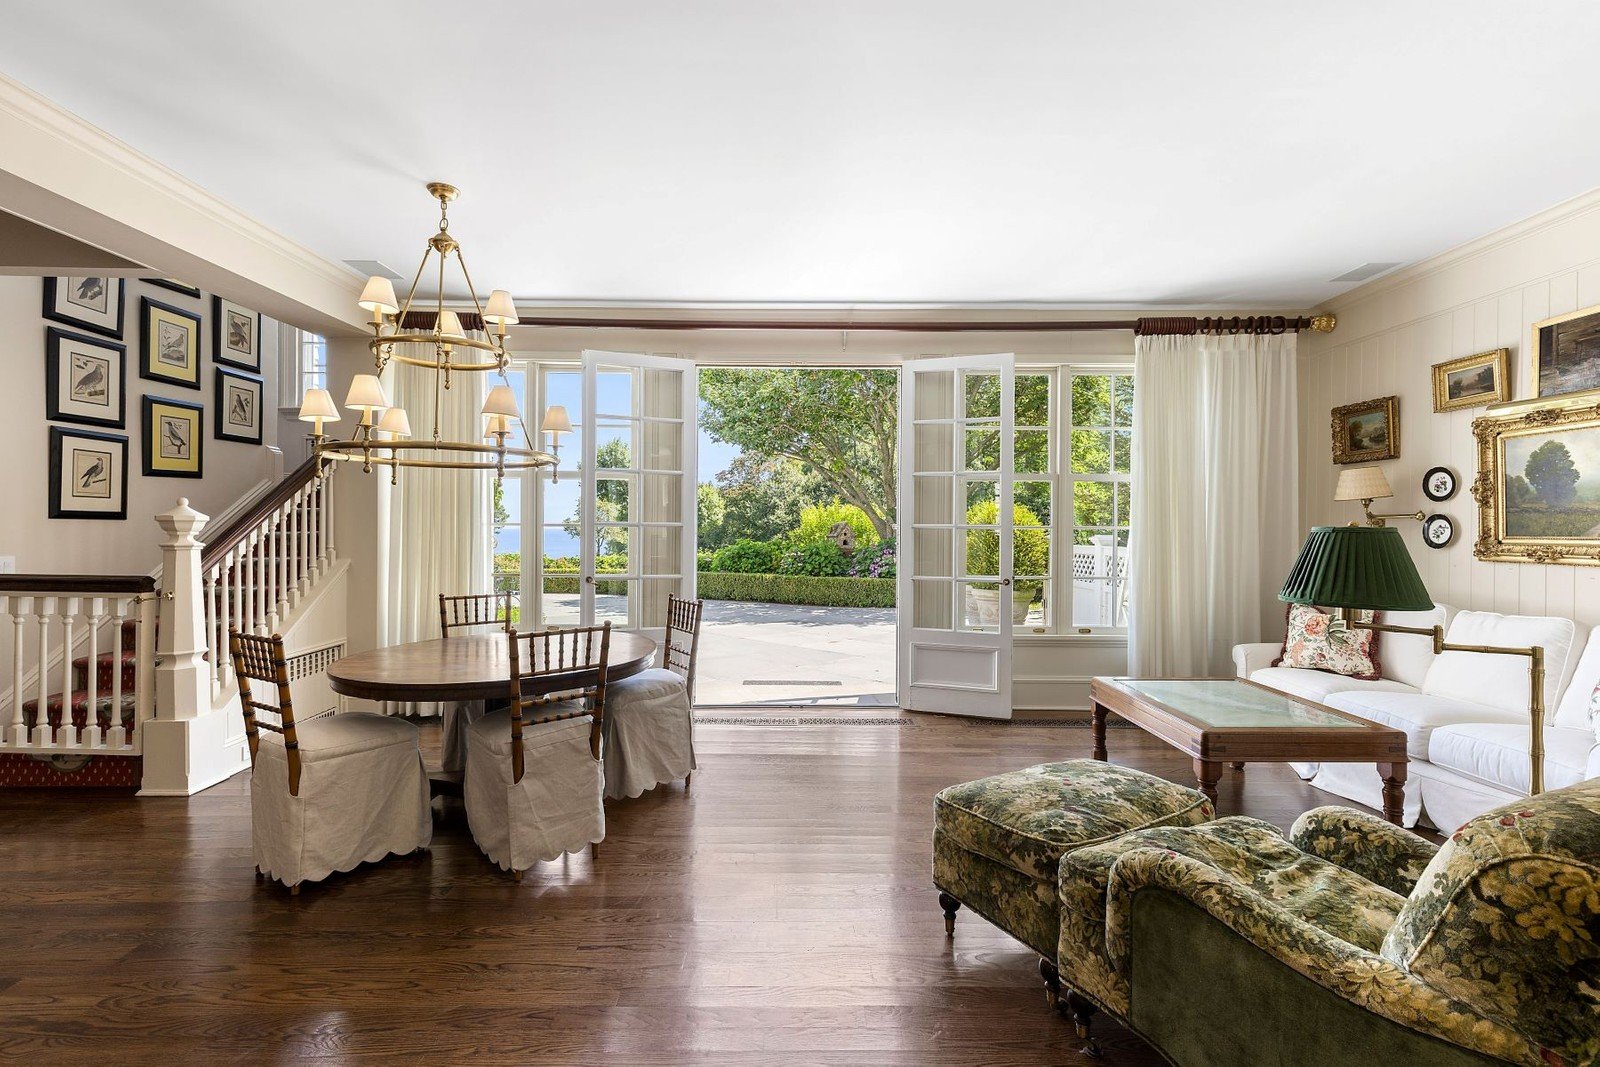 Francis York Daniel Gale Sothebys The Lindens Timeless Long Island Estate Once Home to the Famed Bootleggers, the Vanderbilts, and Rockstars 11.jpeg